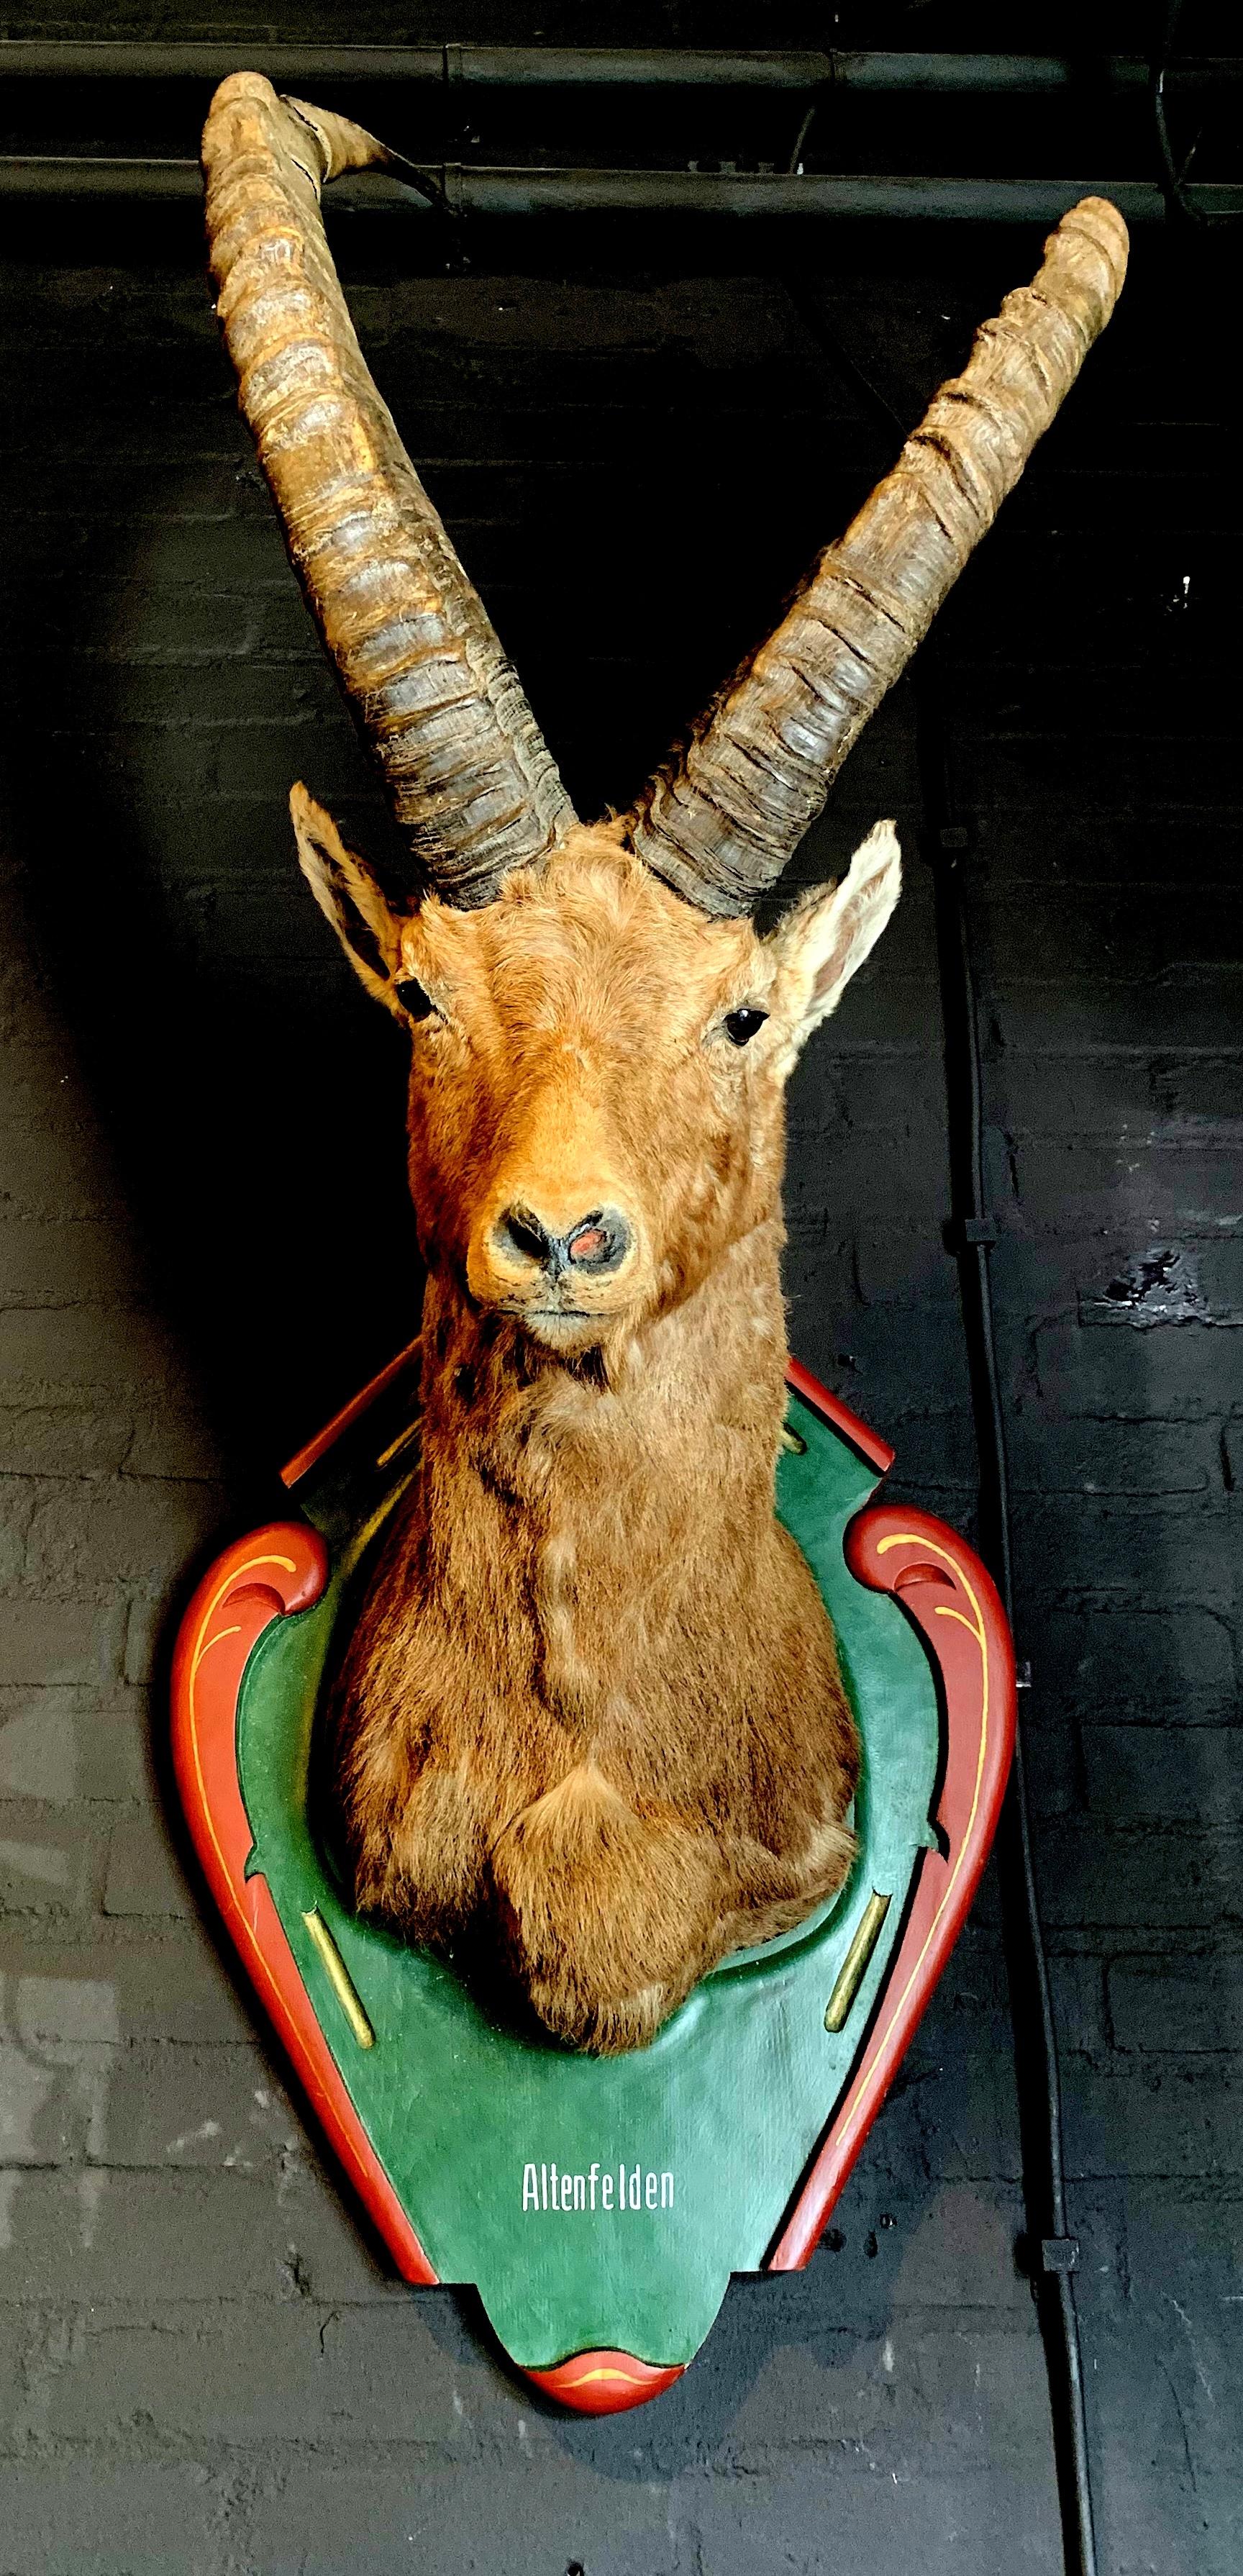 Rare, vintage trophy head of an Alpine ibex. The taxidermy Ibex is mounted on a handmade wooden plaque.
A real eye-catcher for your Alpine Chalet.